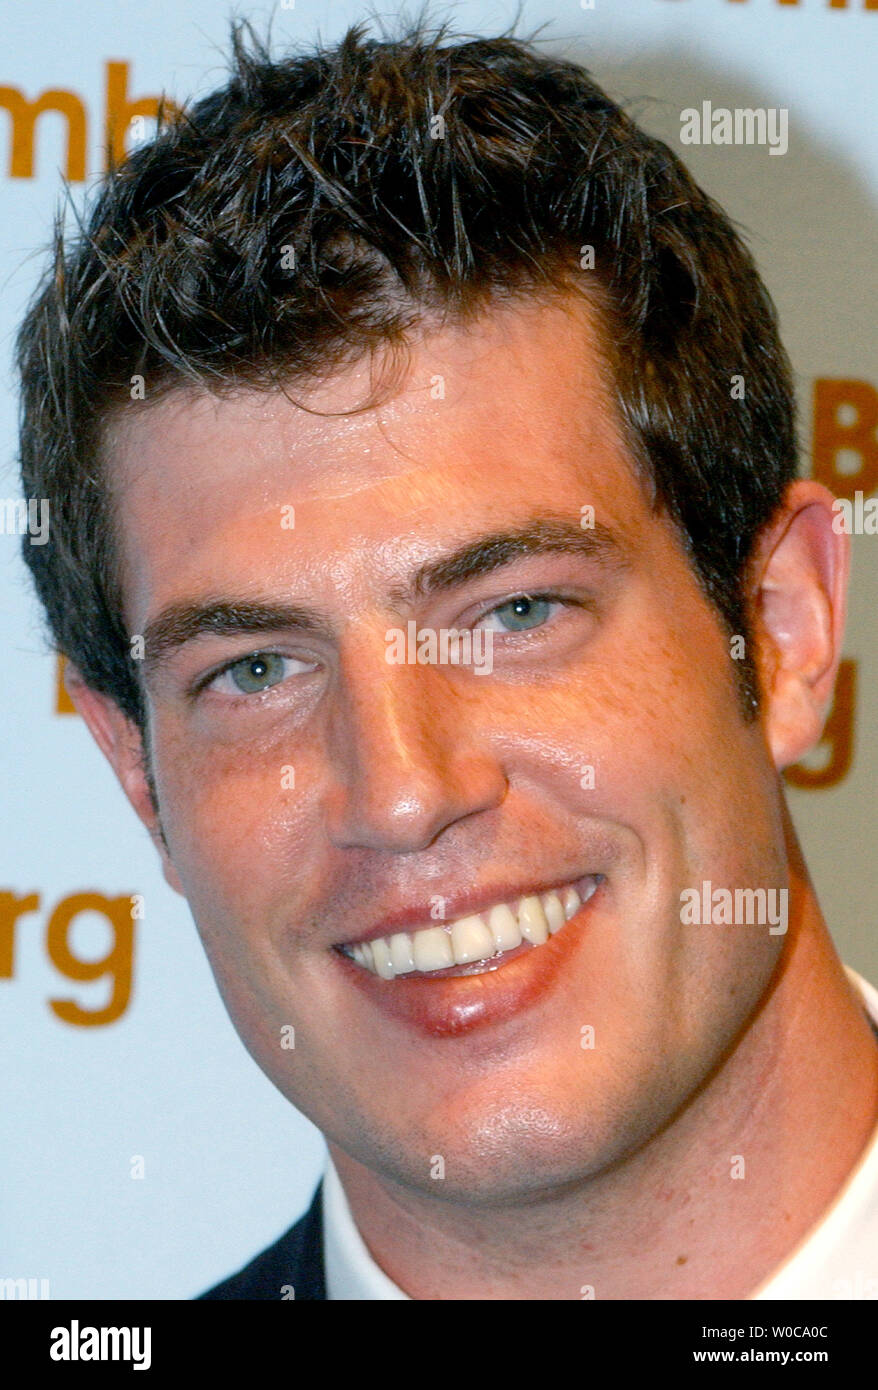 New York Giants 'Bachelor' Jesse Palmer attends the Bloomberg News Party following the annual White House Correspondent's Dinner on May 1, 2004 in Washington.  (UPI Photo/Rick Steele) Stock Photo